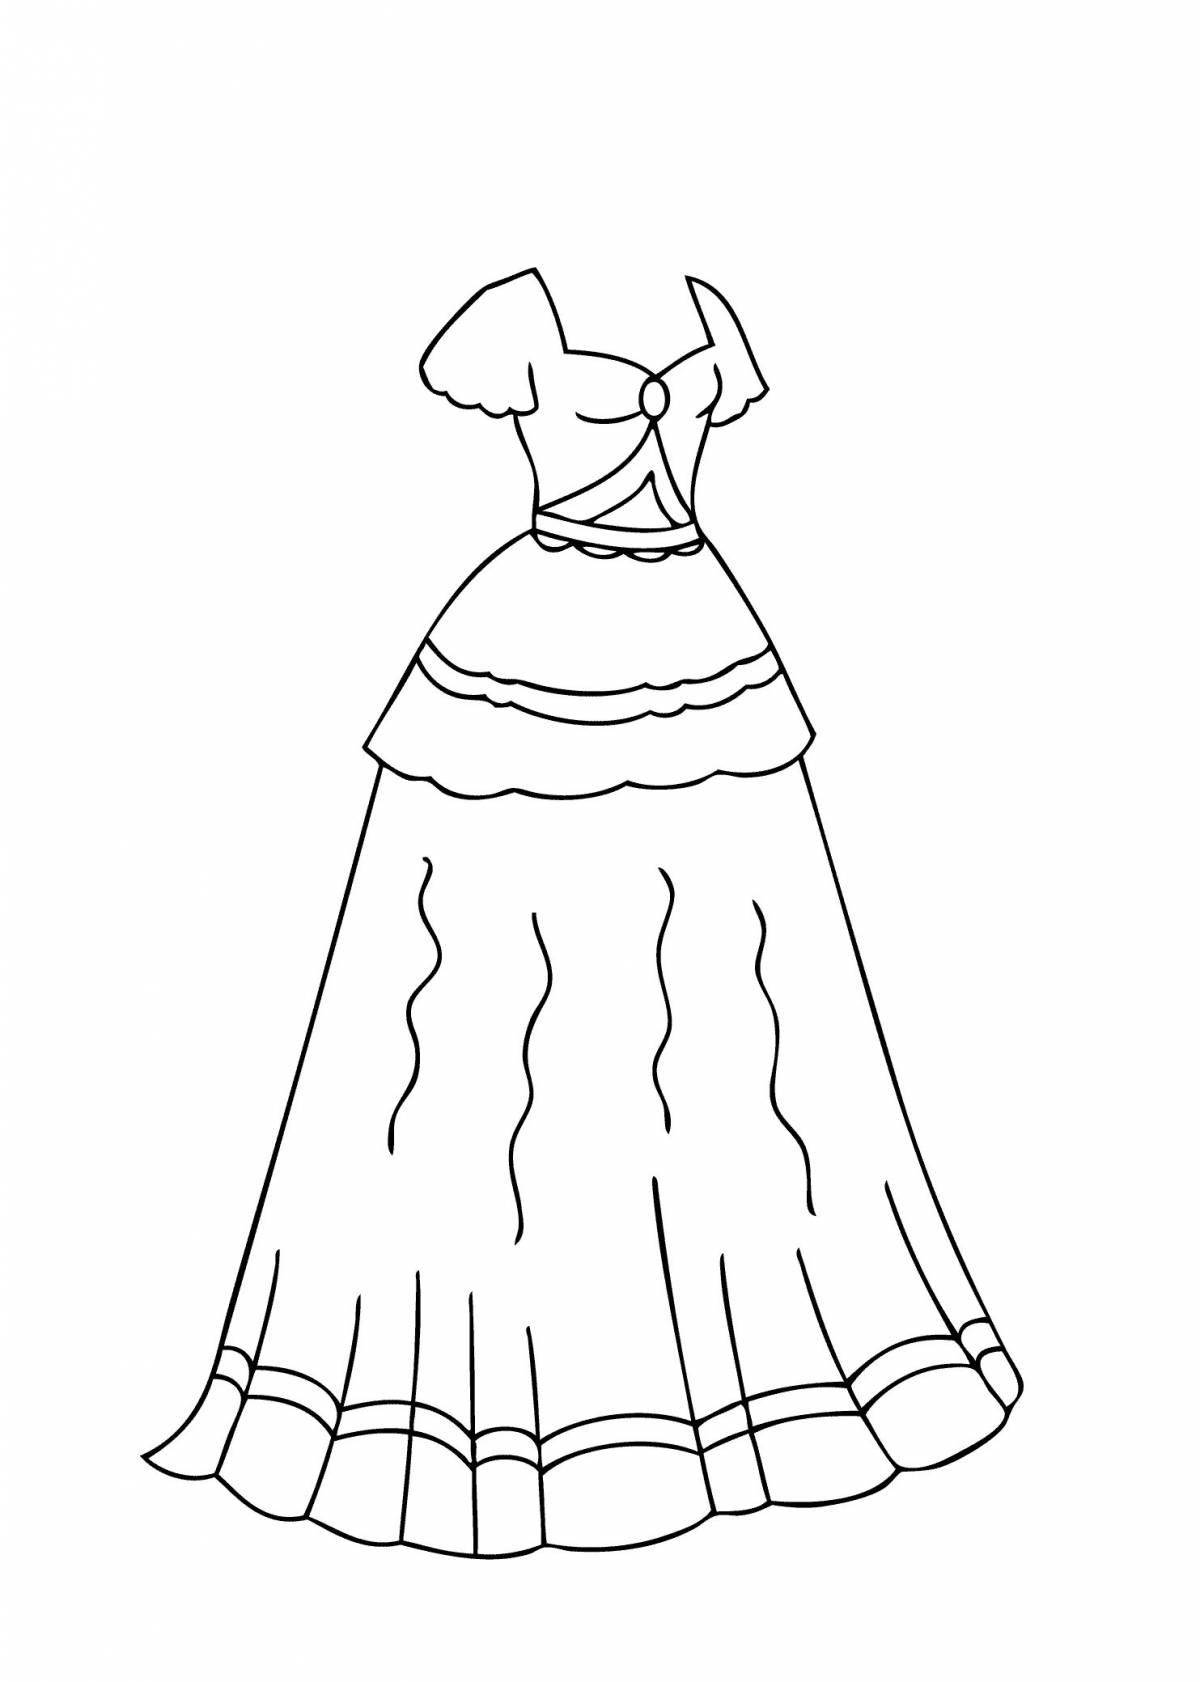 Dazzling sundress coloring book for kids